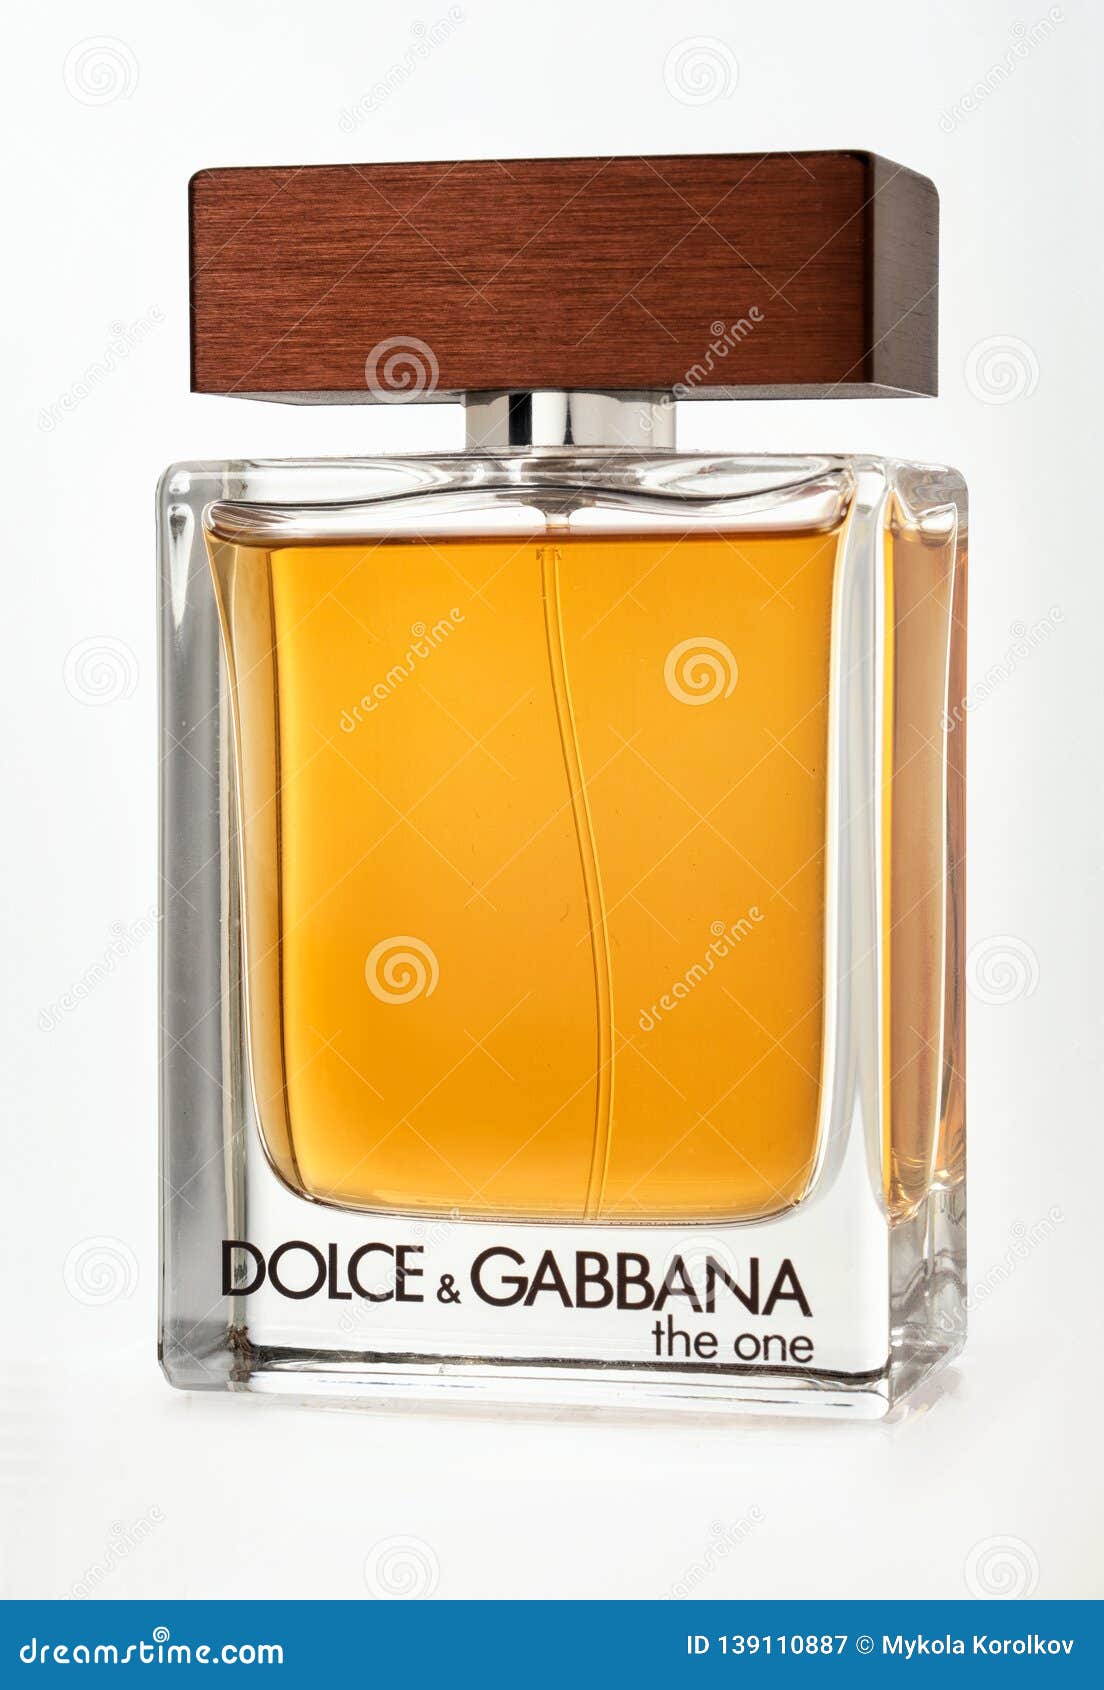 dolce and glamour perfume